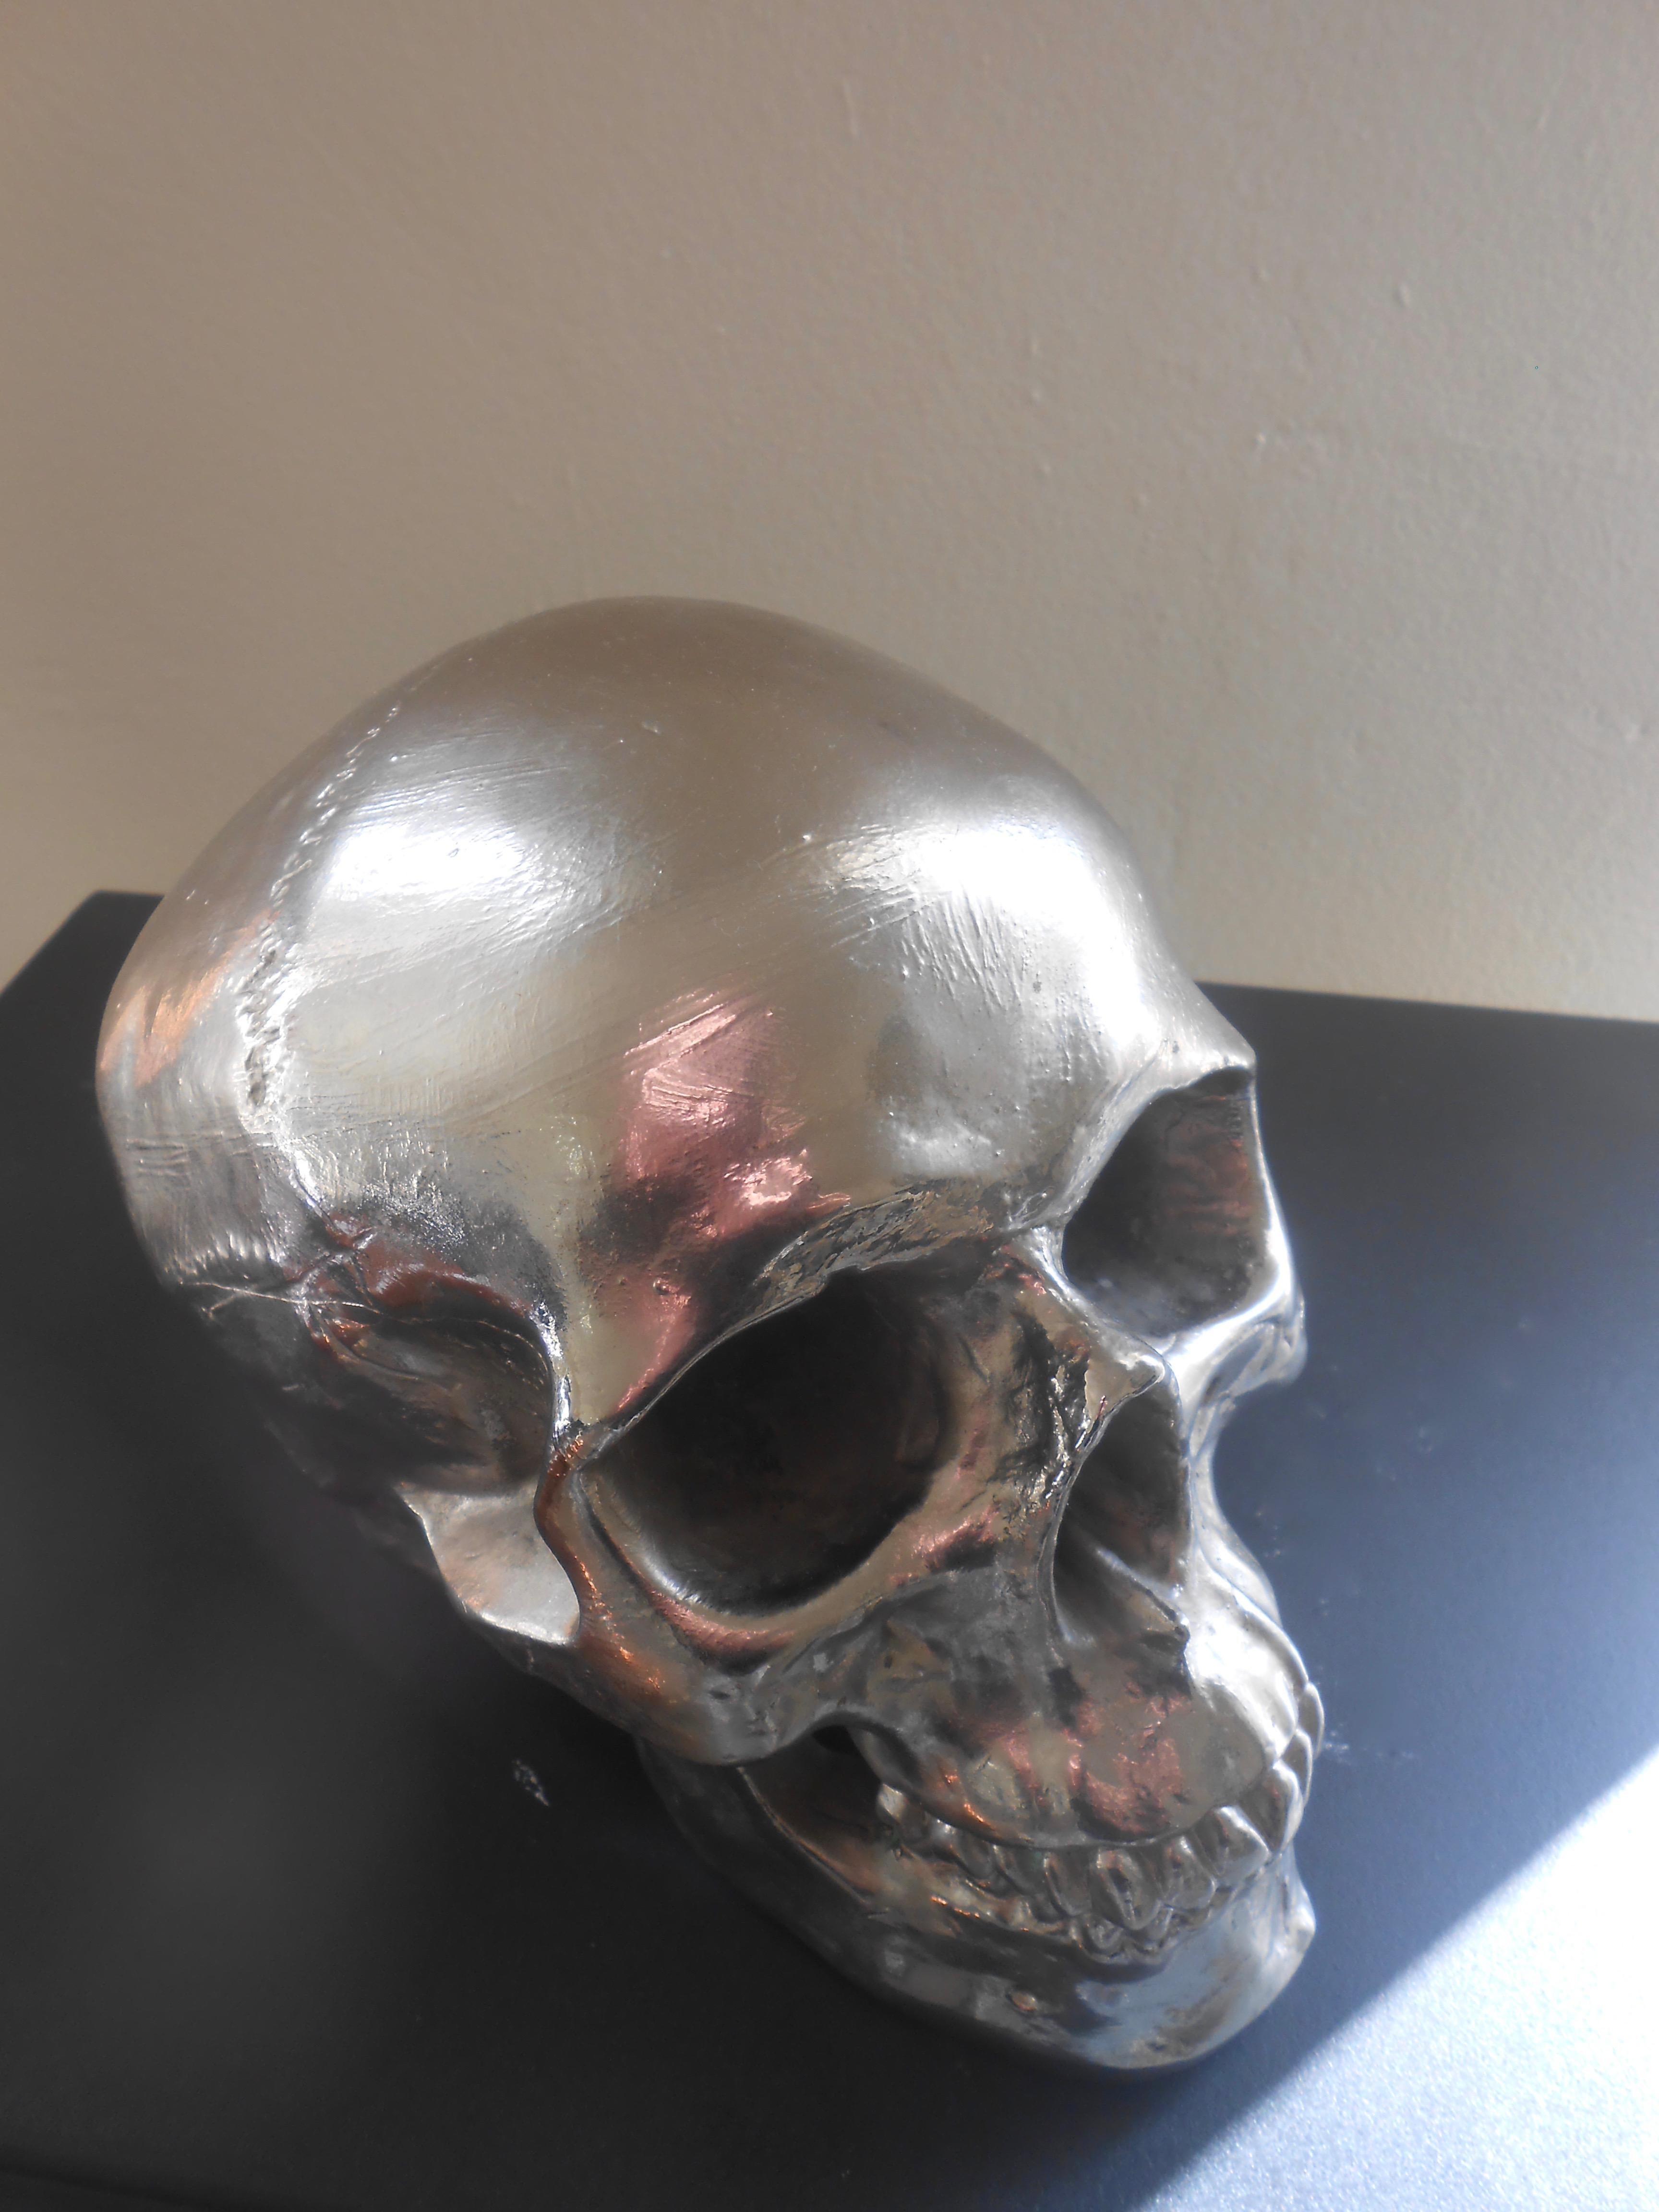 Massive Nickeled Resin Skull Signed Y.D., Belgium, 1989 In Good Condition For Sale In Brussels, BE